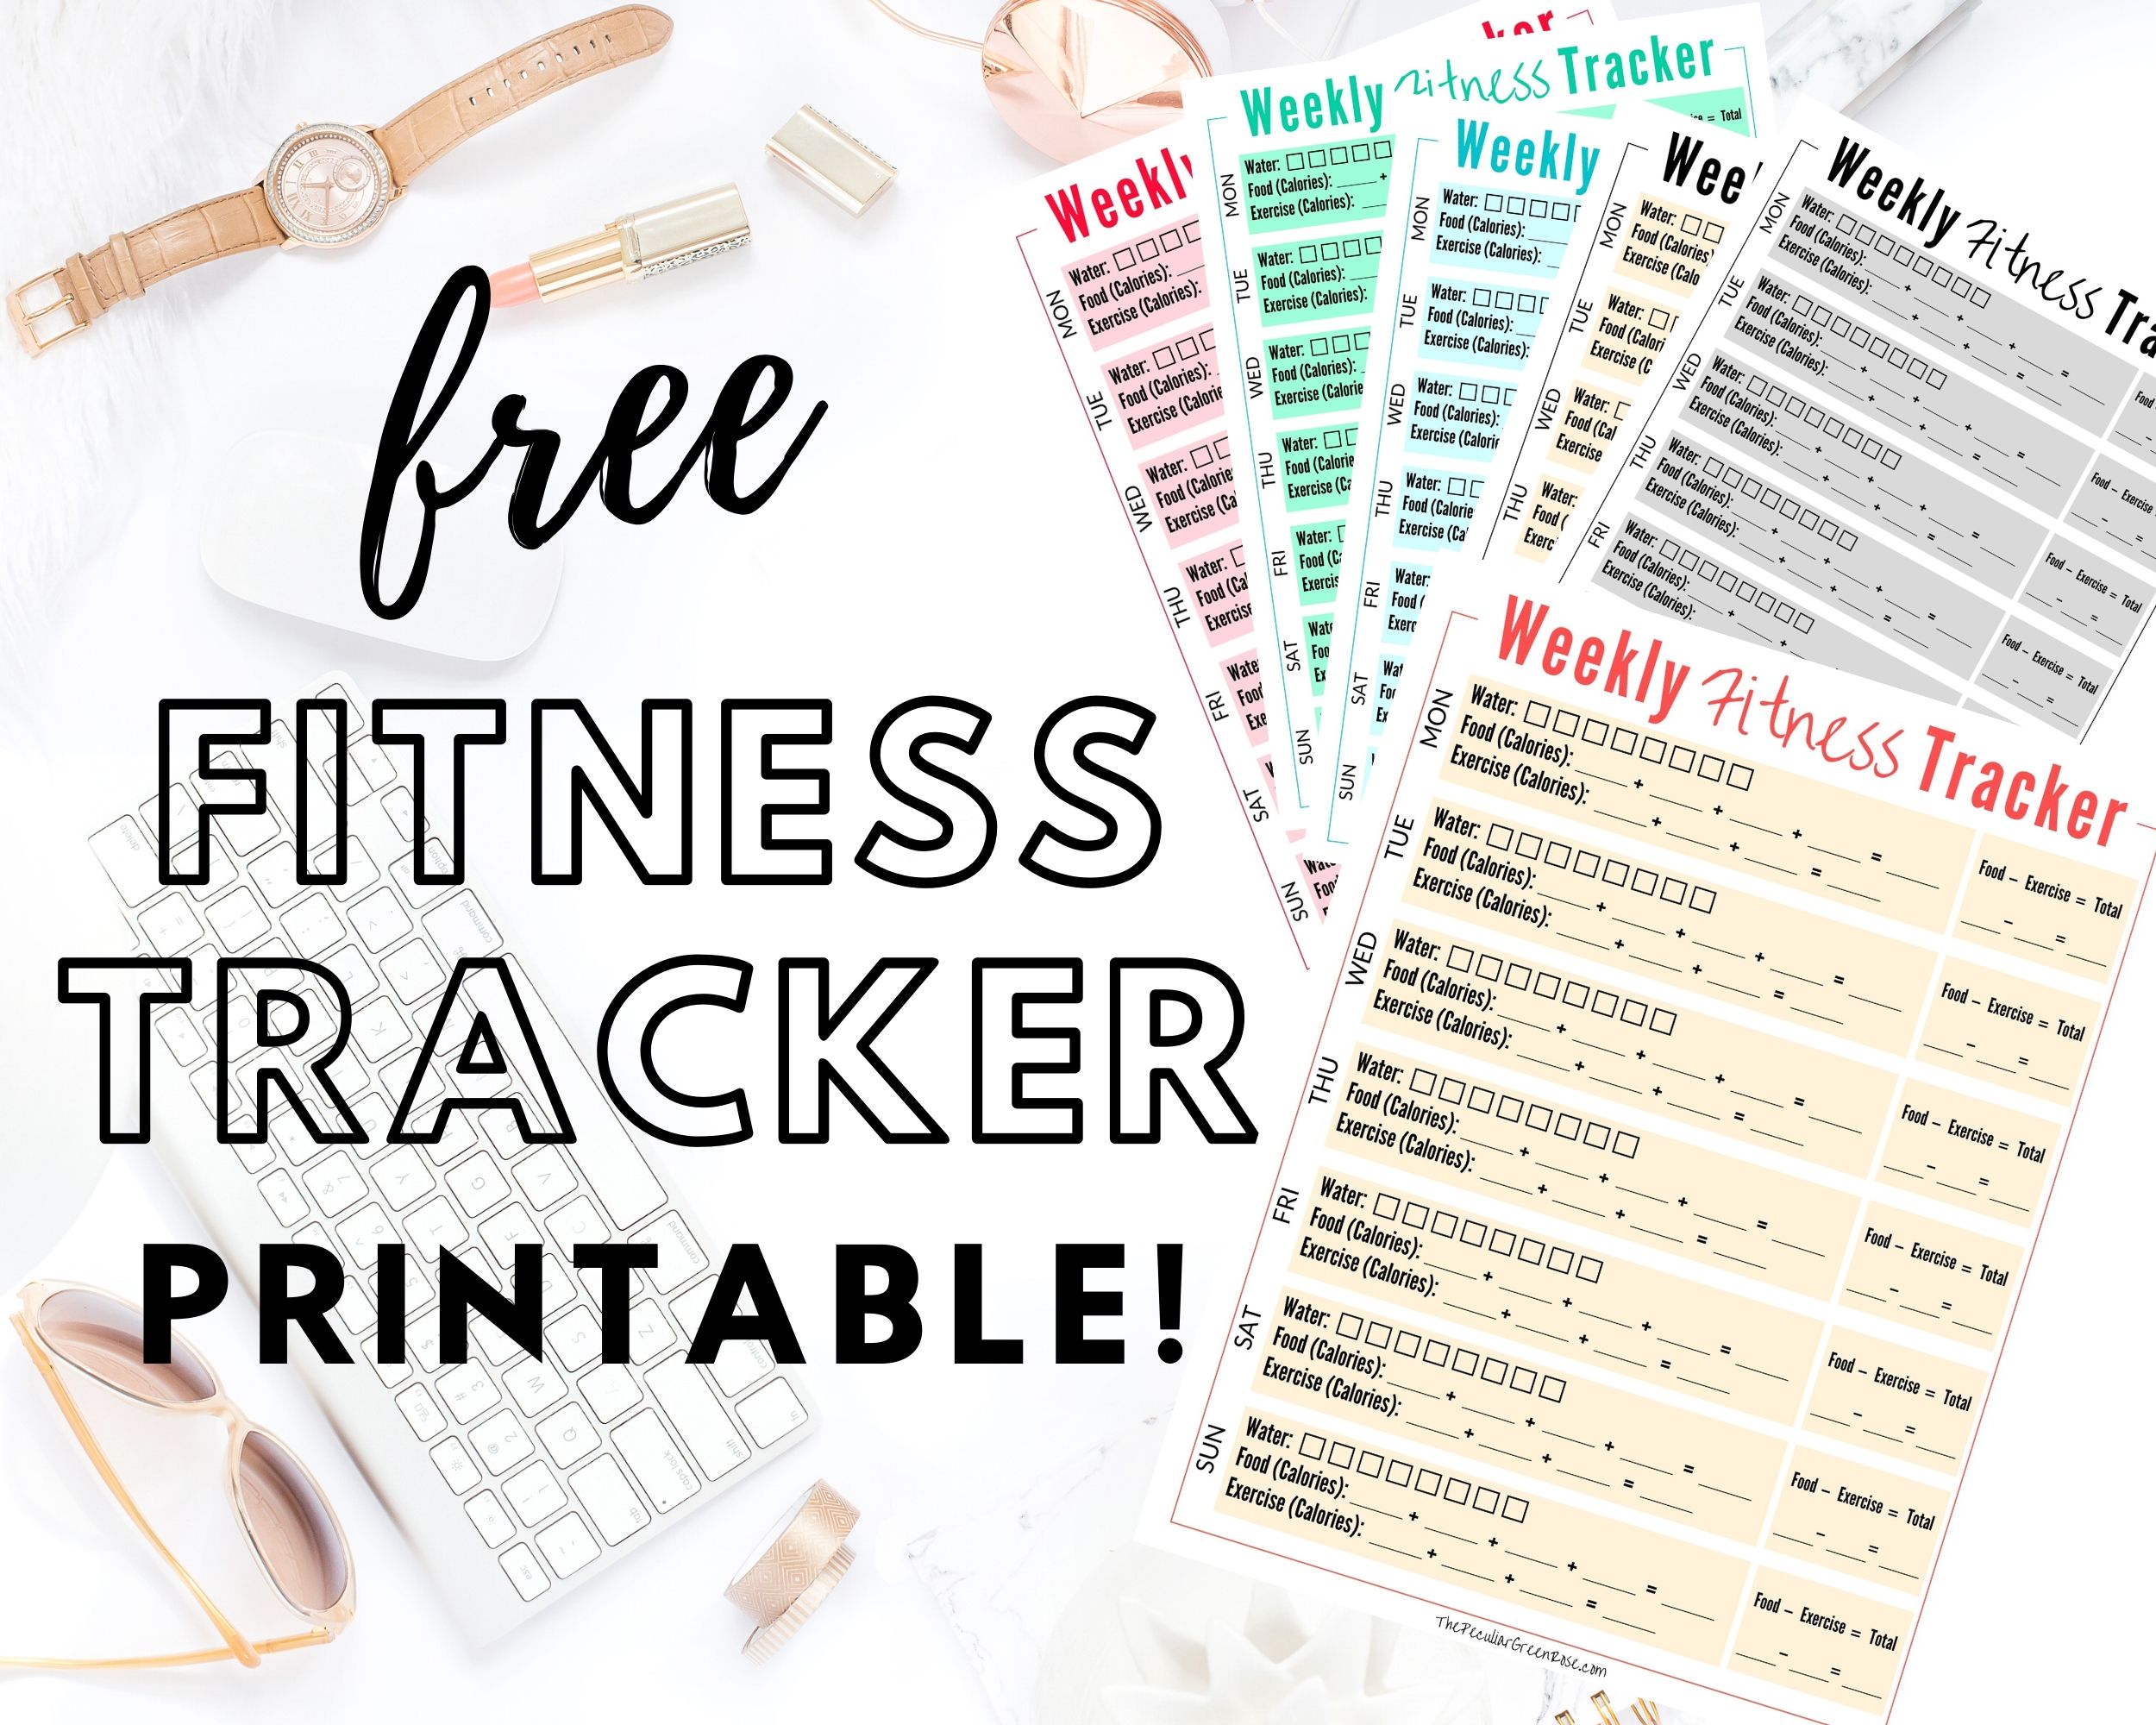 https://www.thepeculiargreenrose.com/wp-content/uploads/2020/04/Free-Printable-Food-and-Fitness-Tracker.jpg